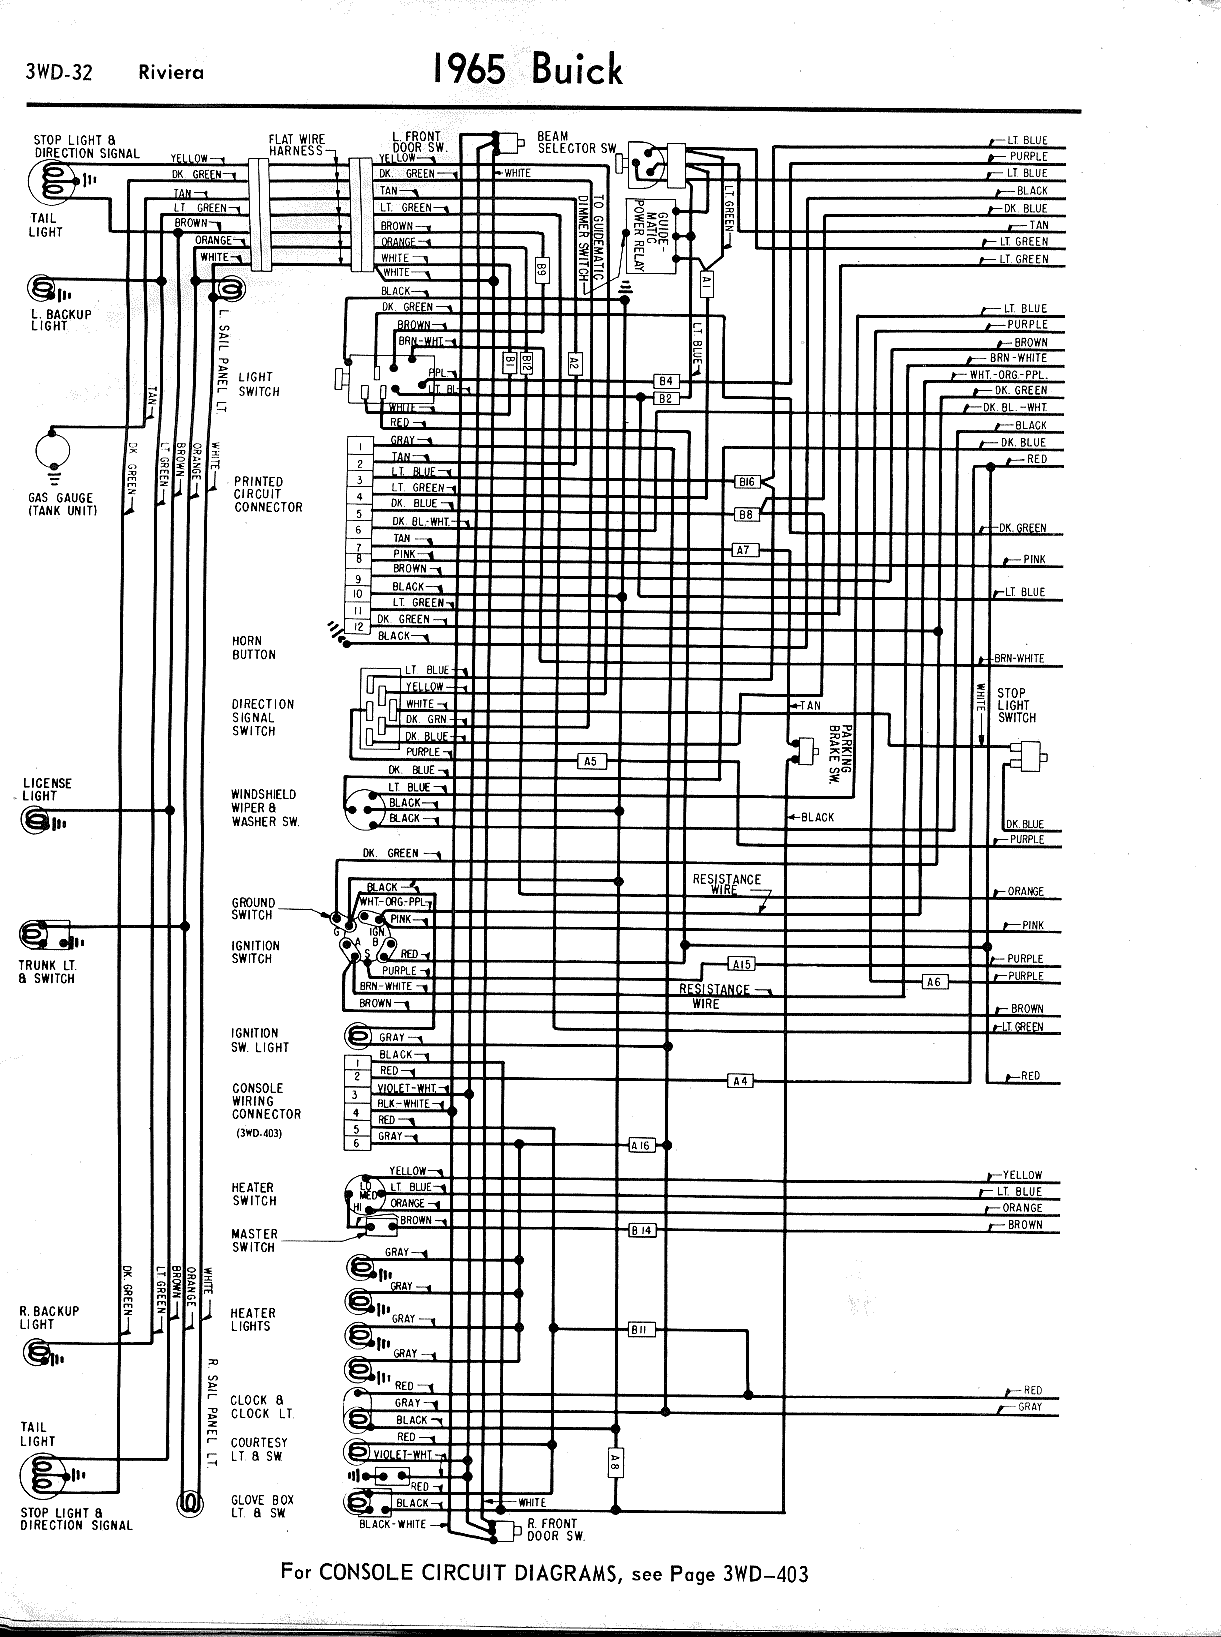 2002 Buick Lesabre Radio Wiring Diagram from www.oldcarmanualproject.com